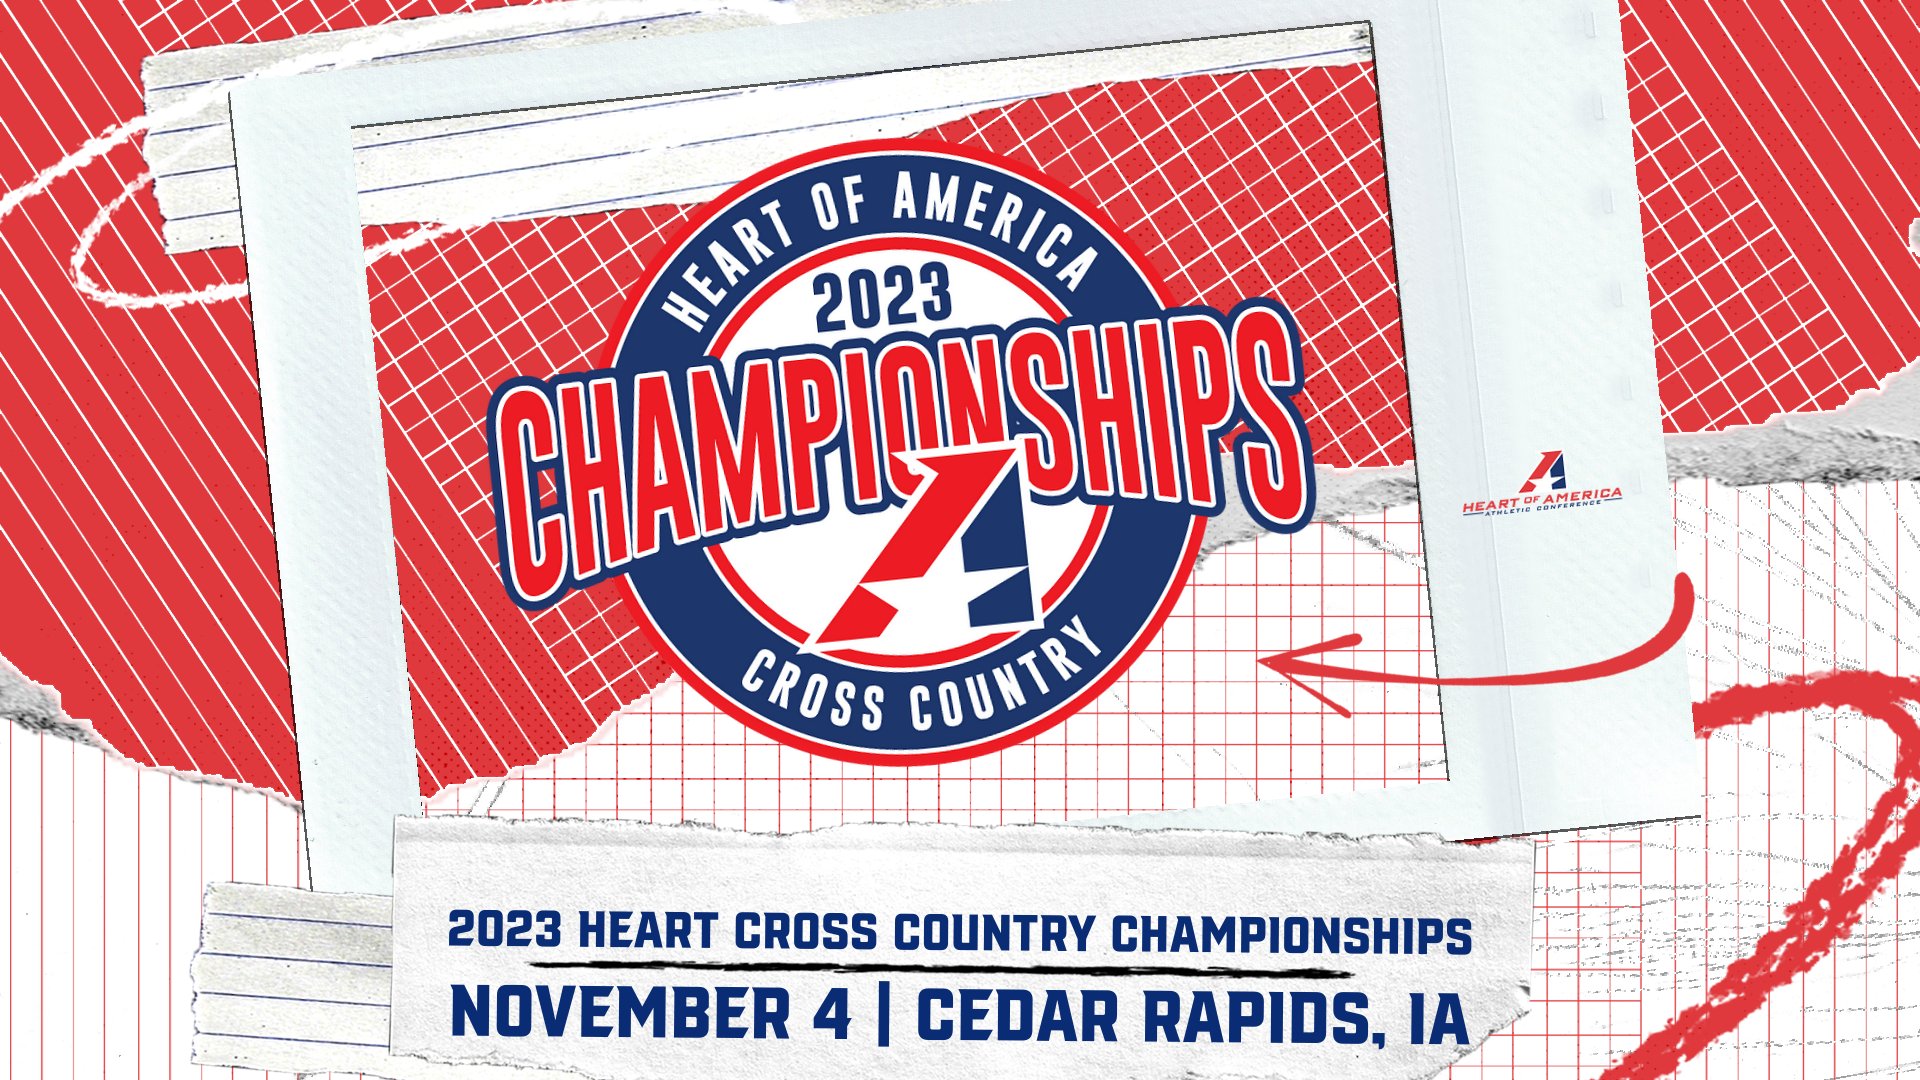 2023 Heart Cross Country Championships